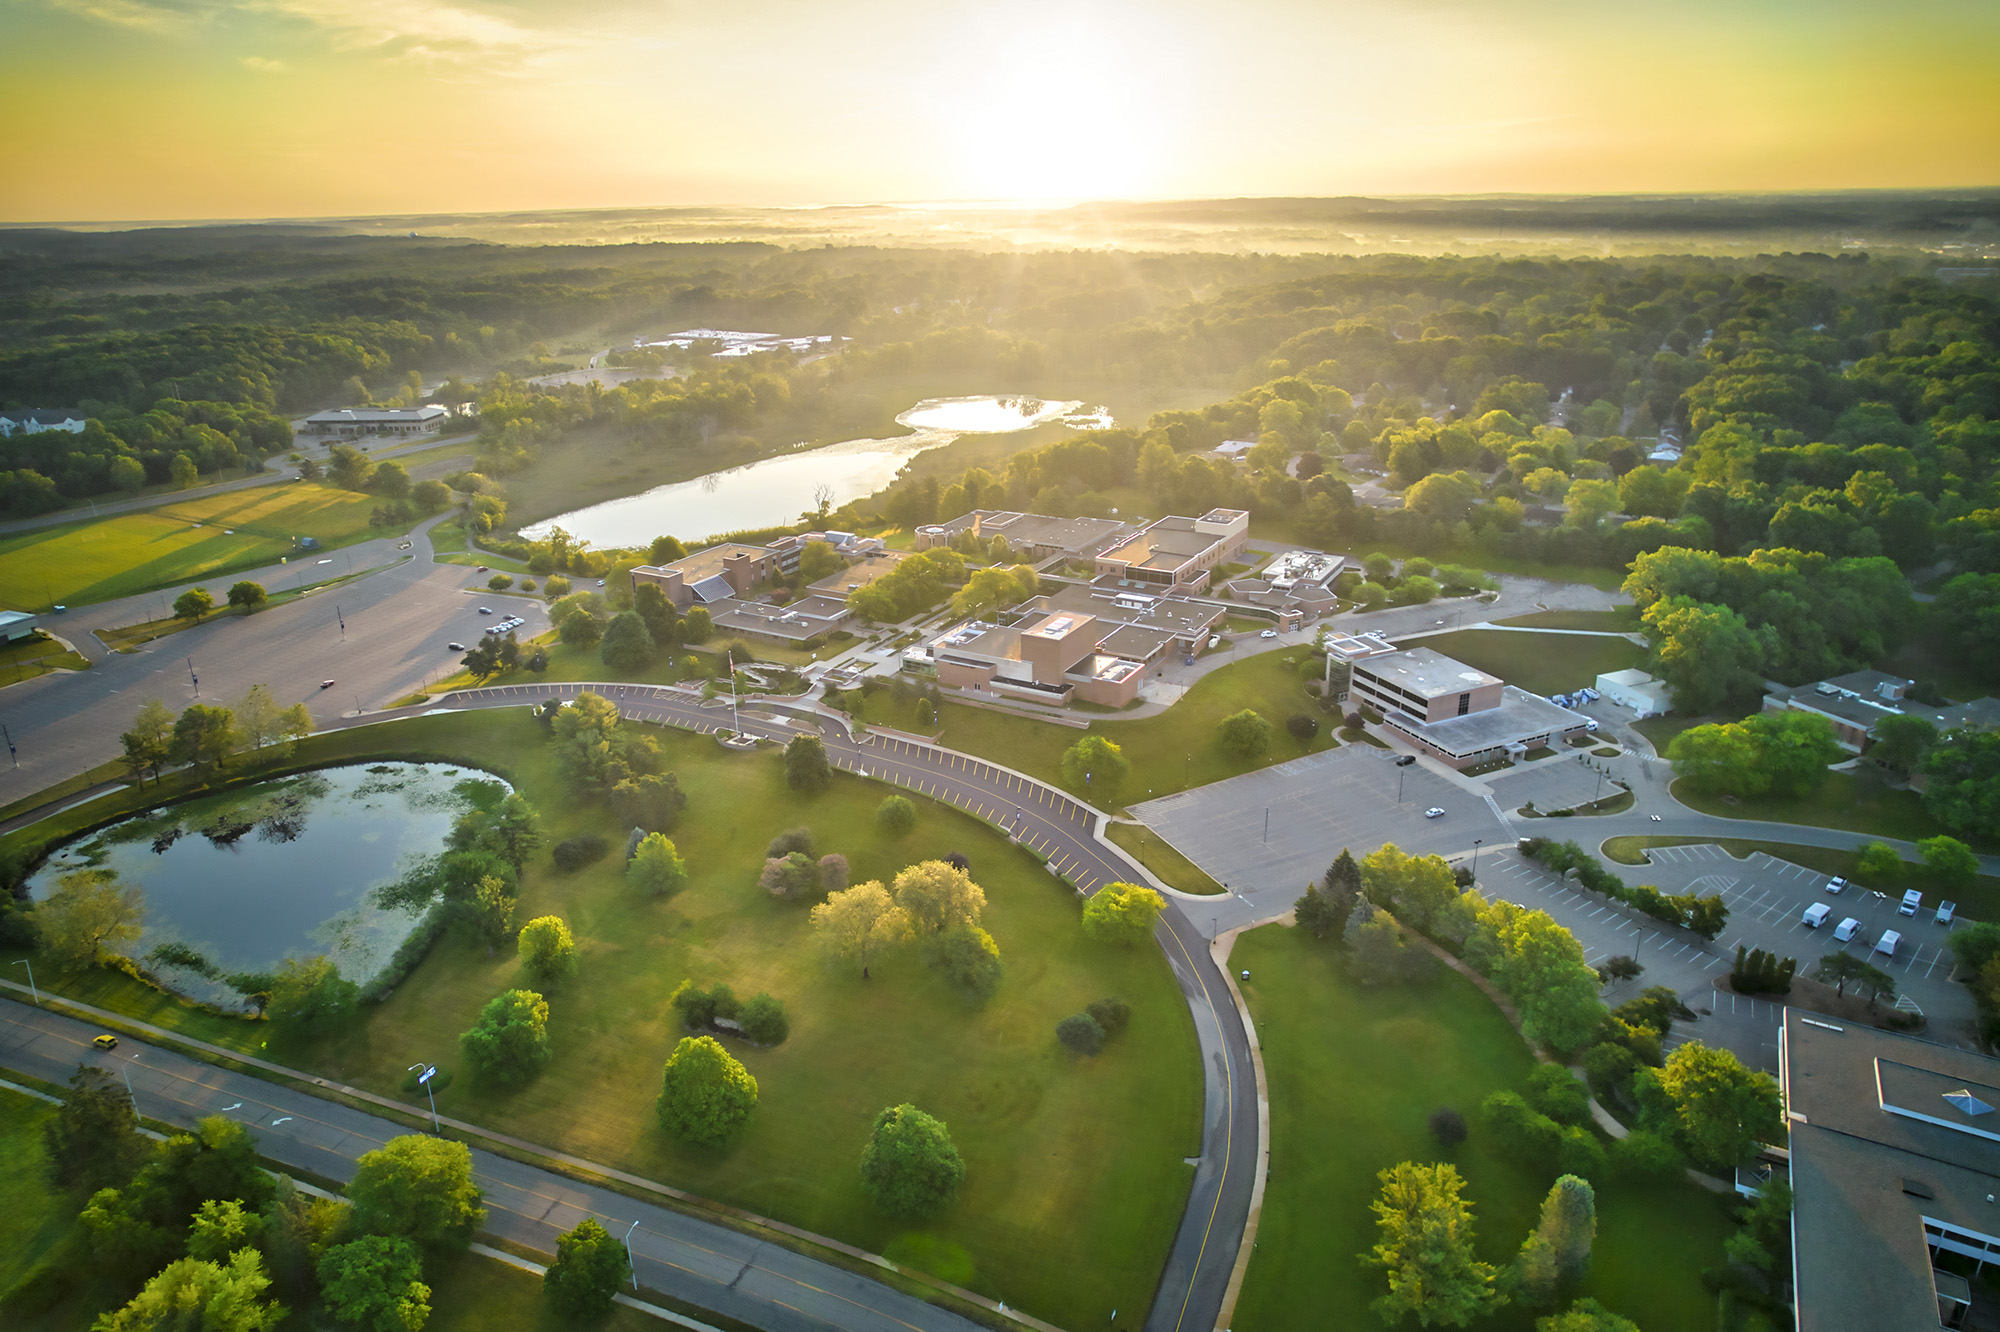 An aerial view of the North Avenue campus at sunrise.